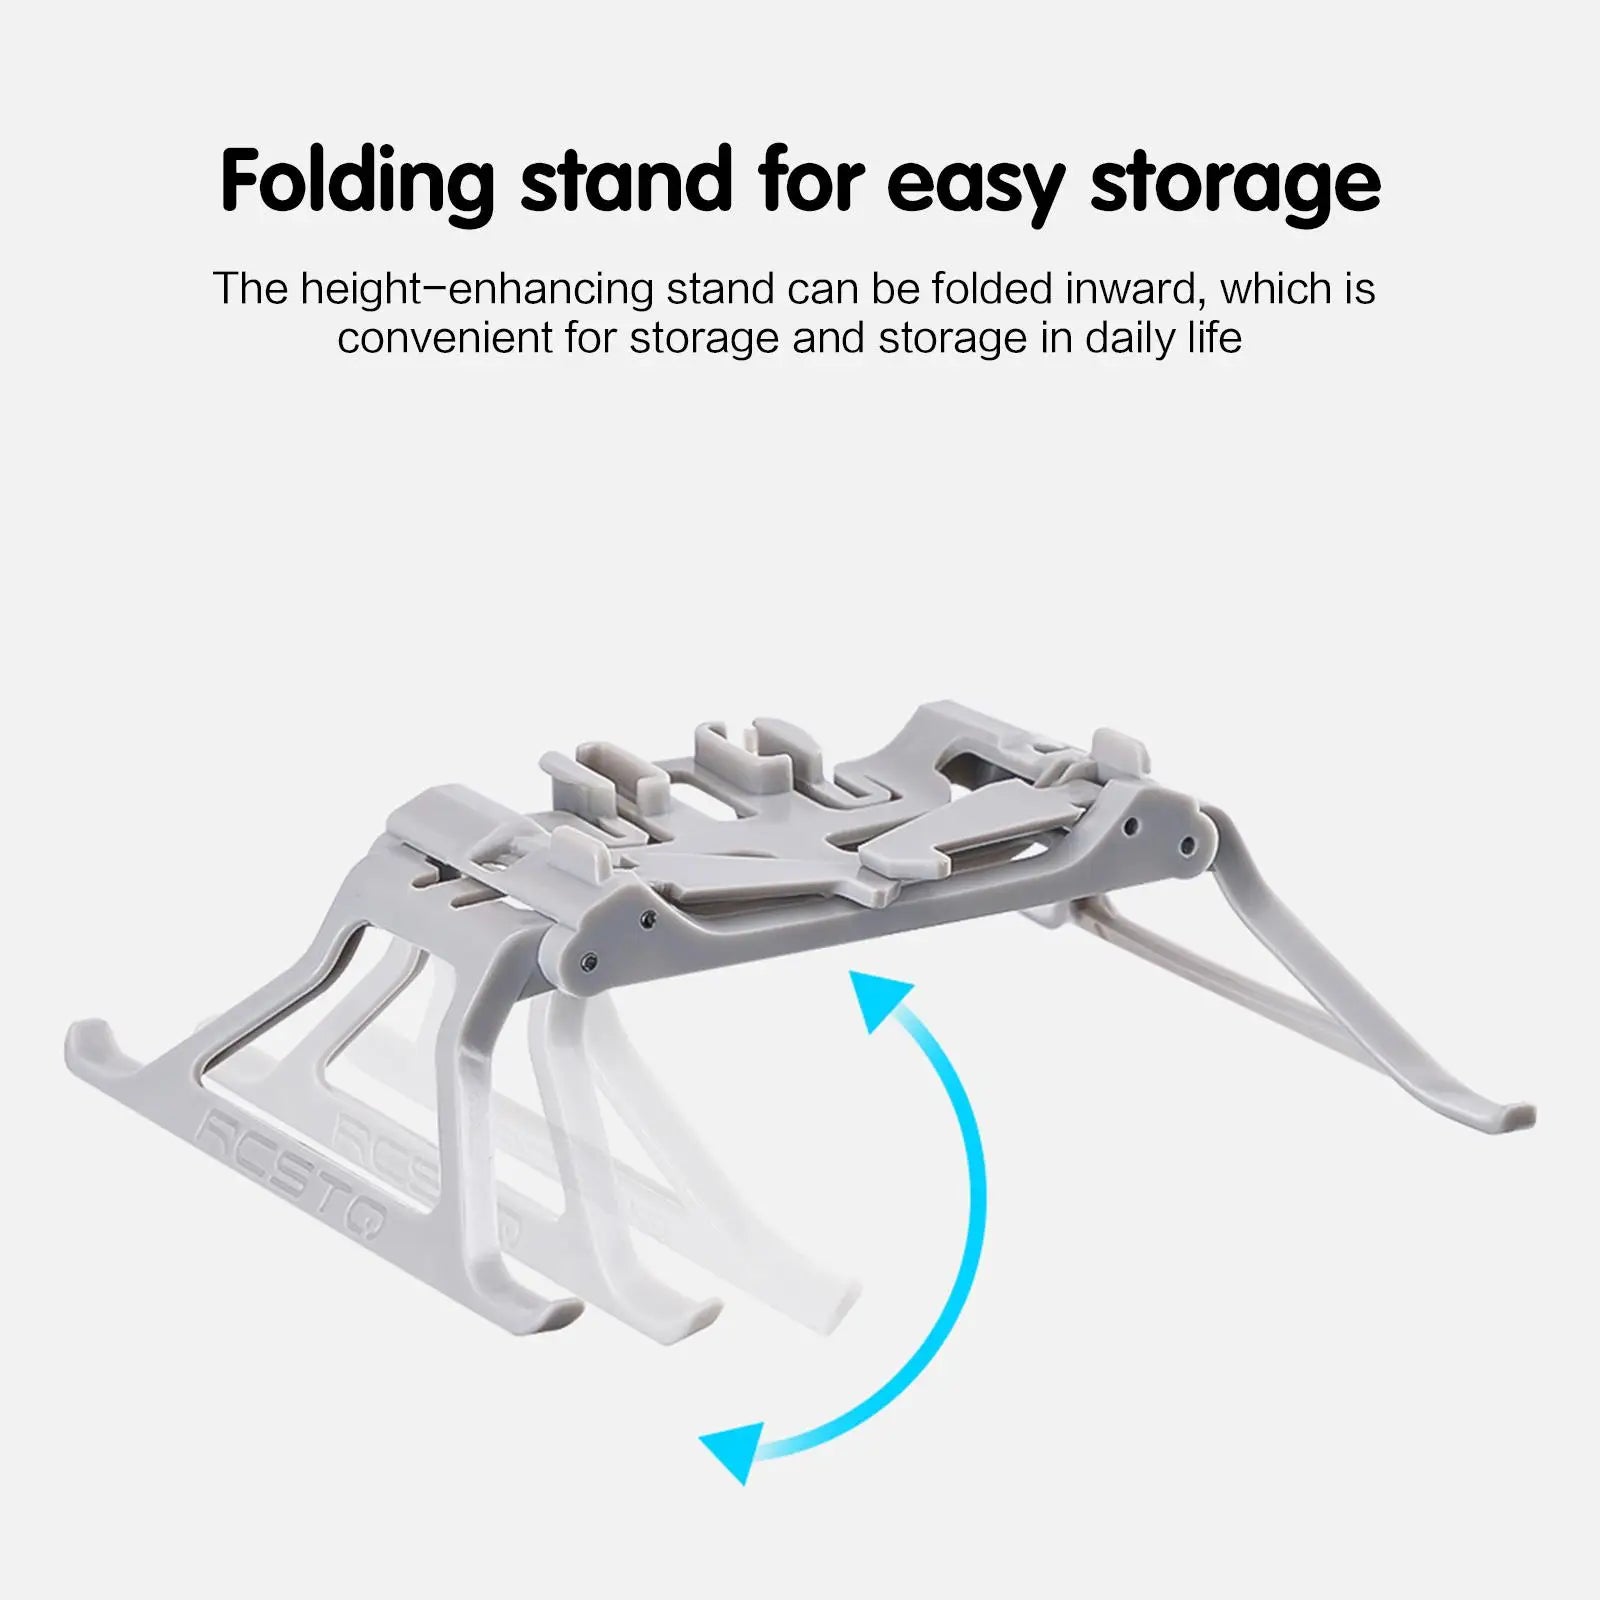 Folding stand for easy storage The height-enhancing stand can be folded inward, which is